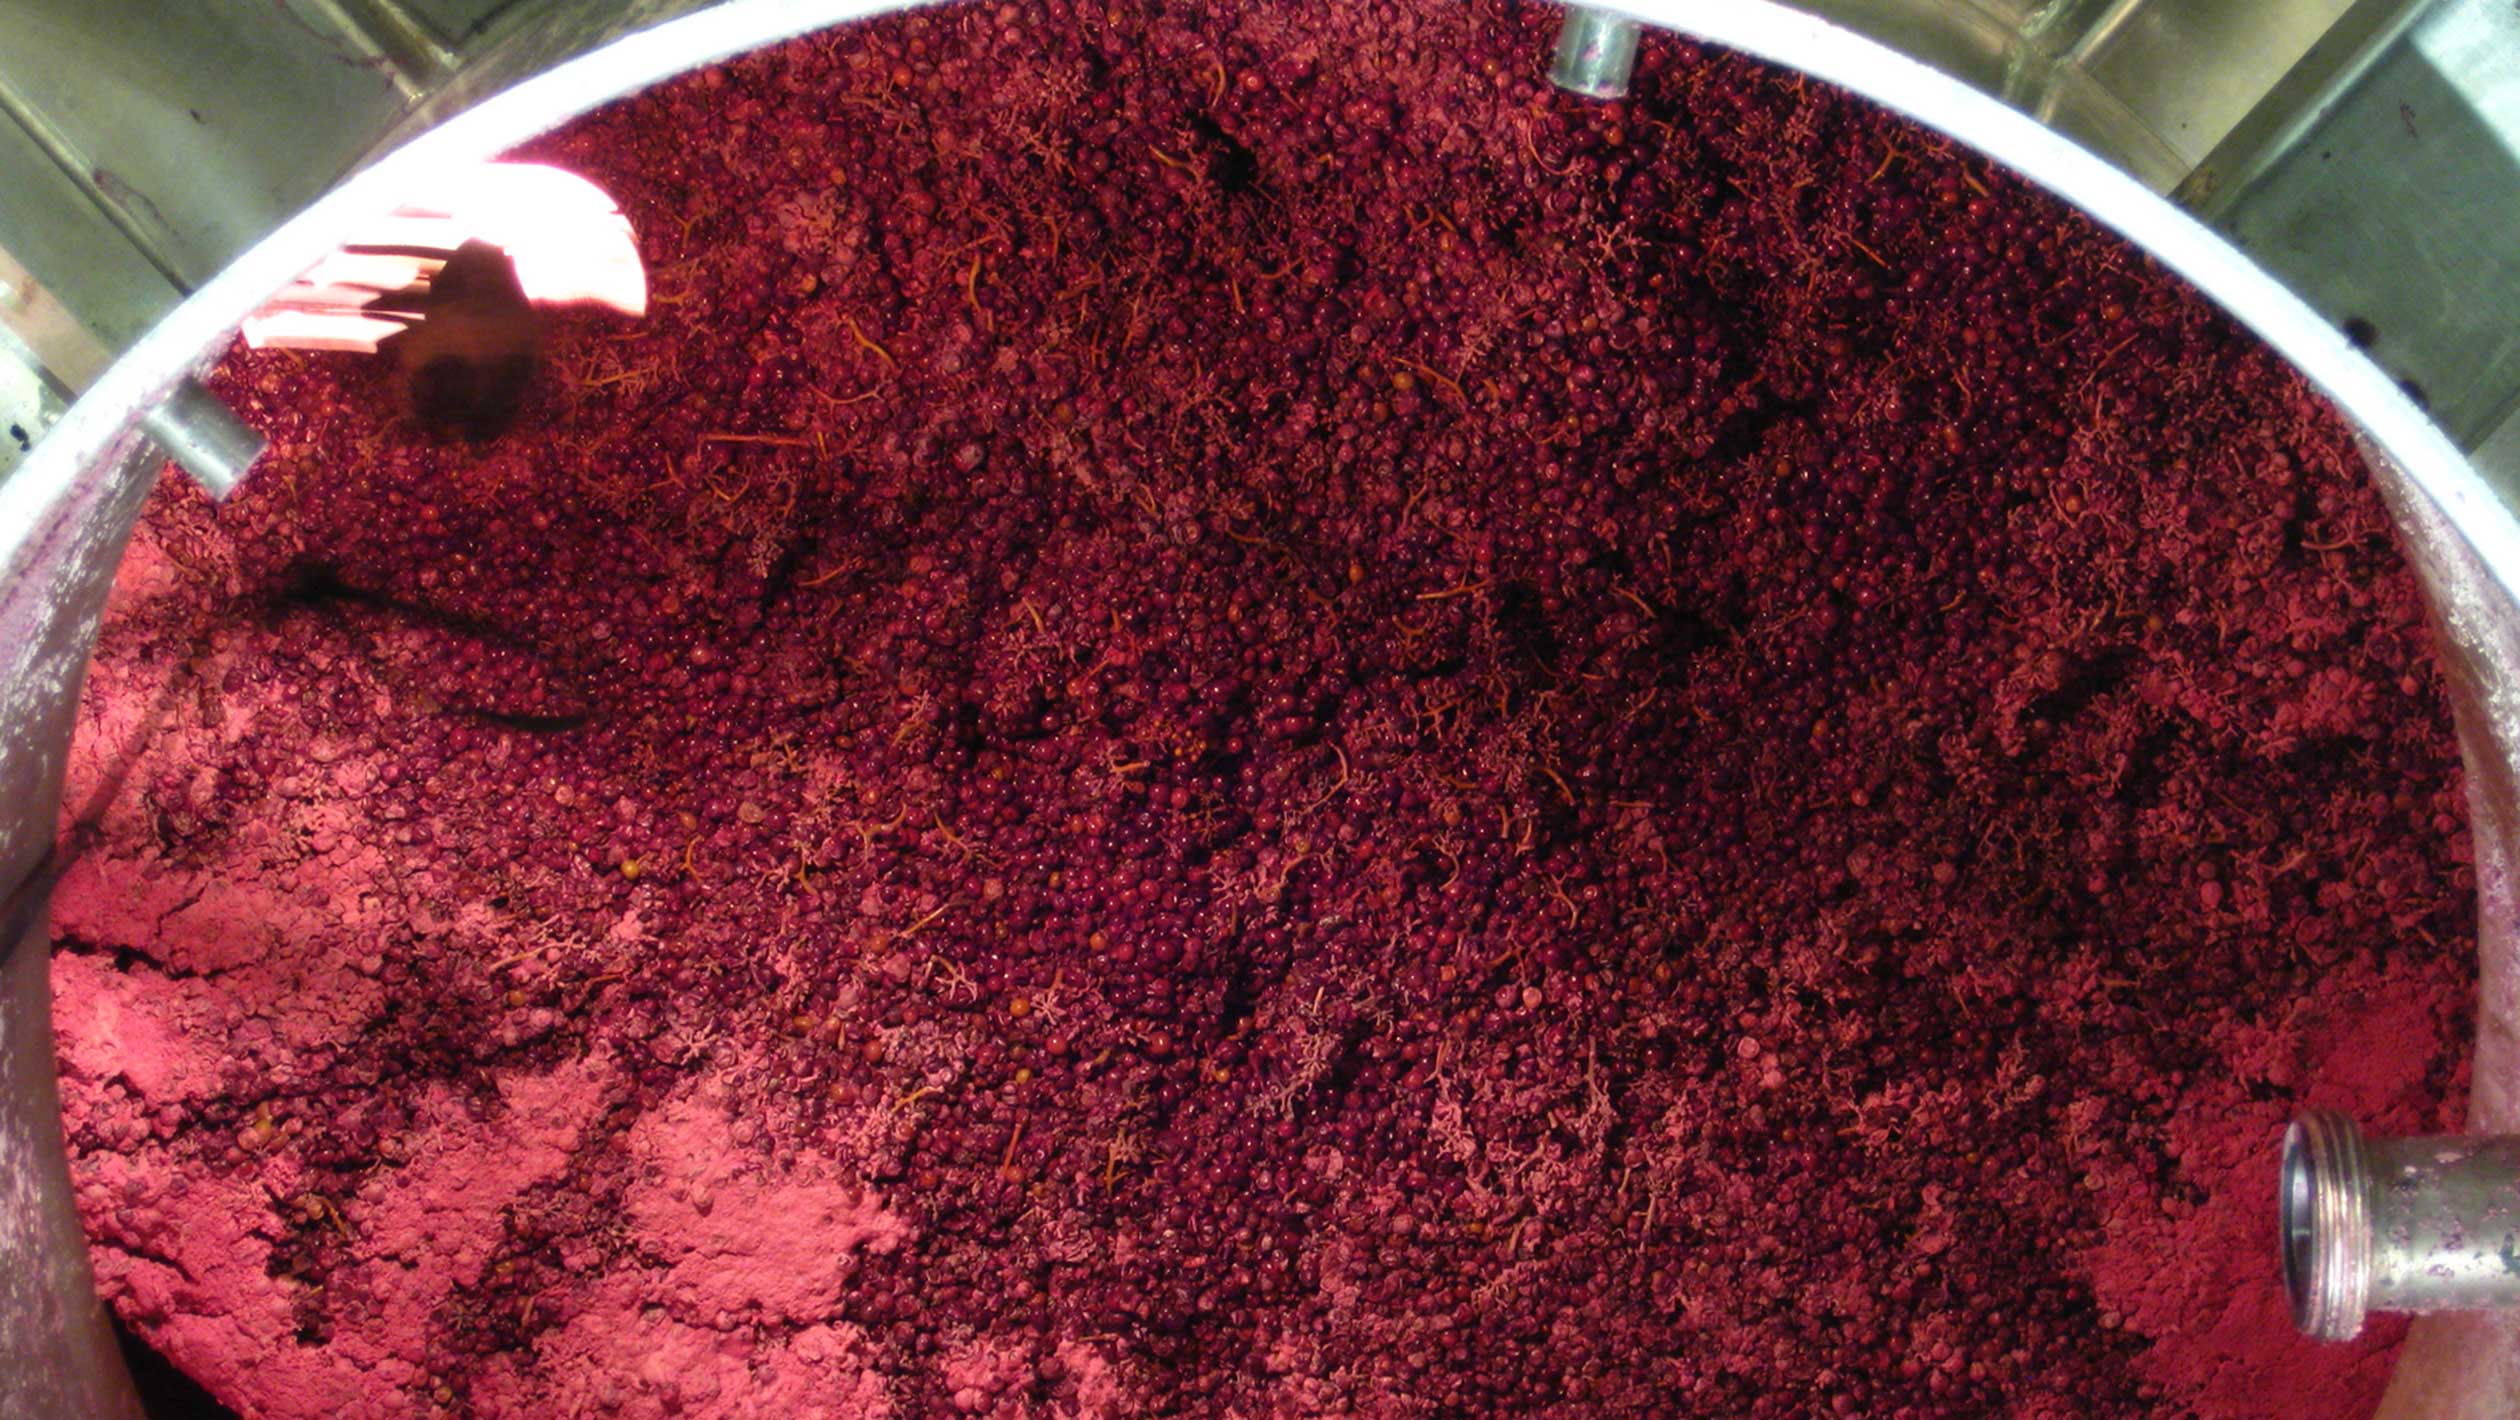 An above-view of a vat of grapes during semi-carbonic maceration process